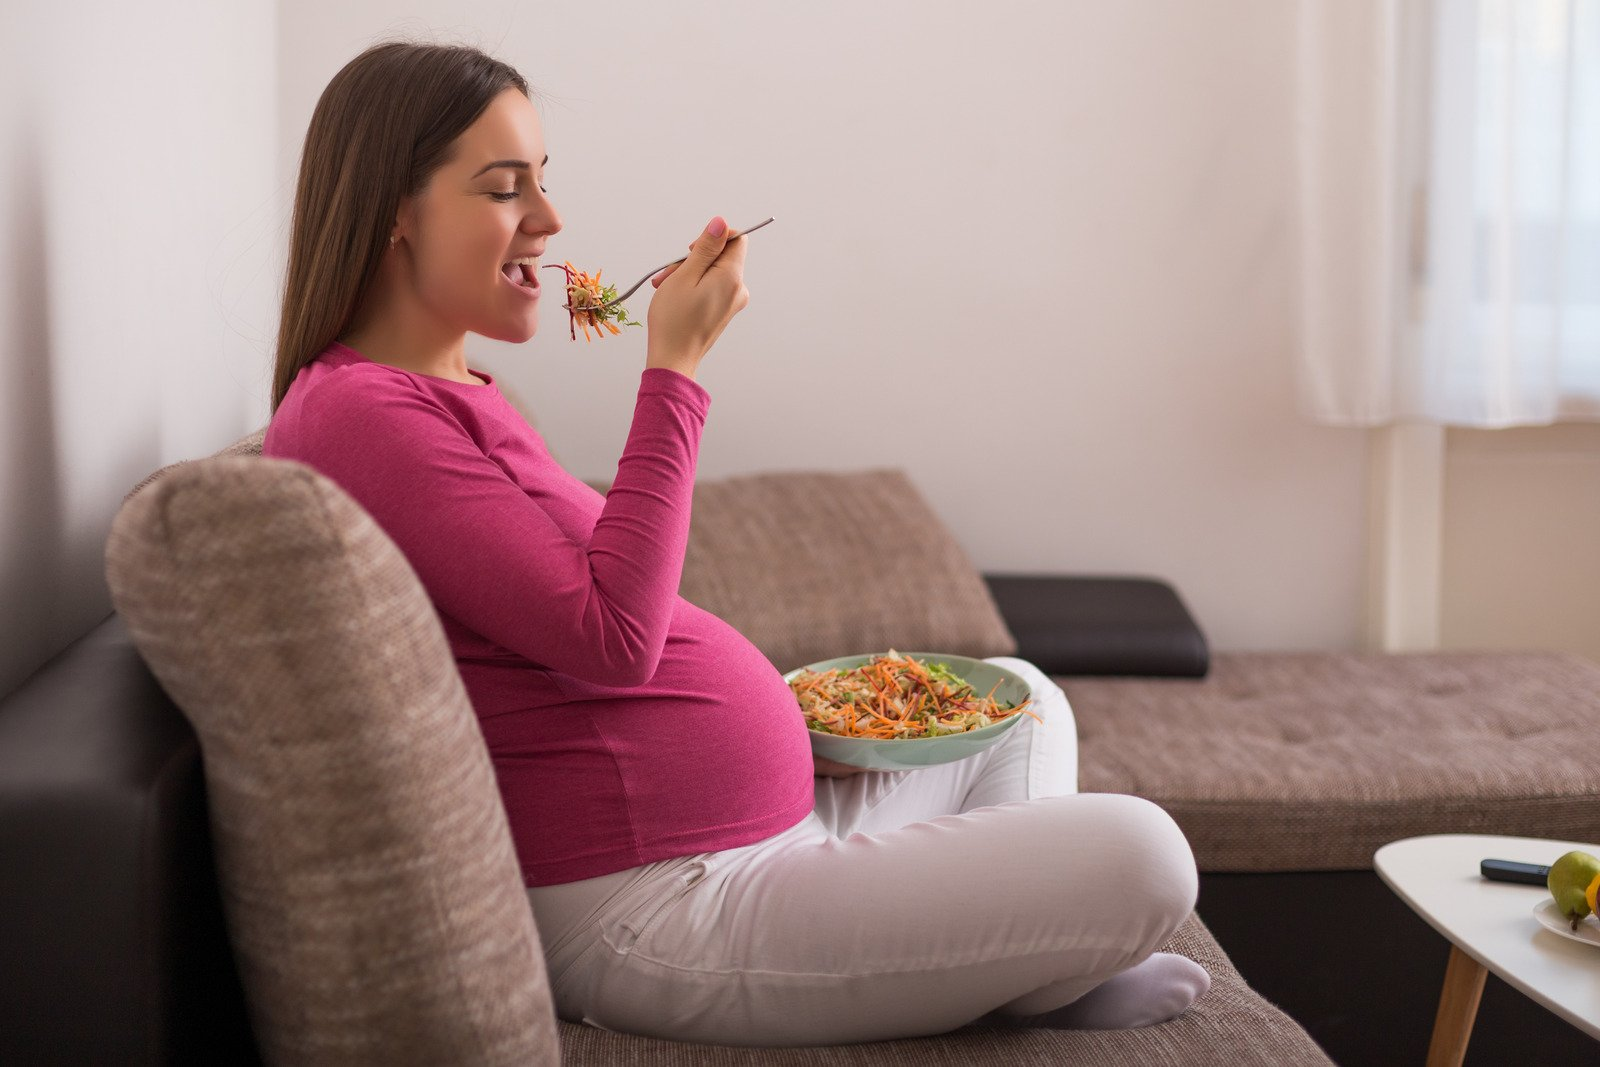 pregnant woman a nutrient rich meal to ensure she has a healthy pregnancy.